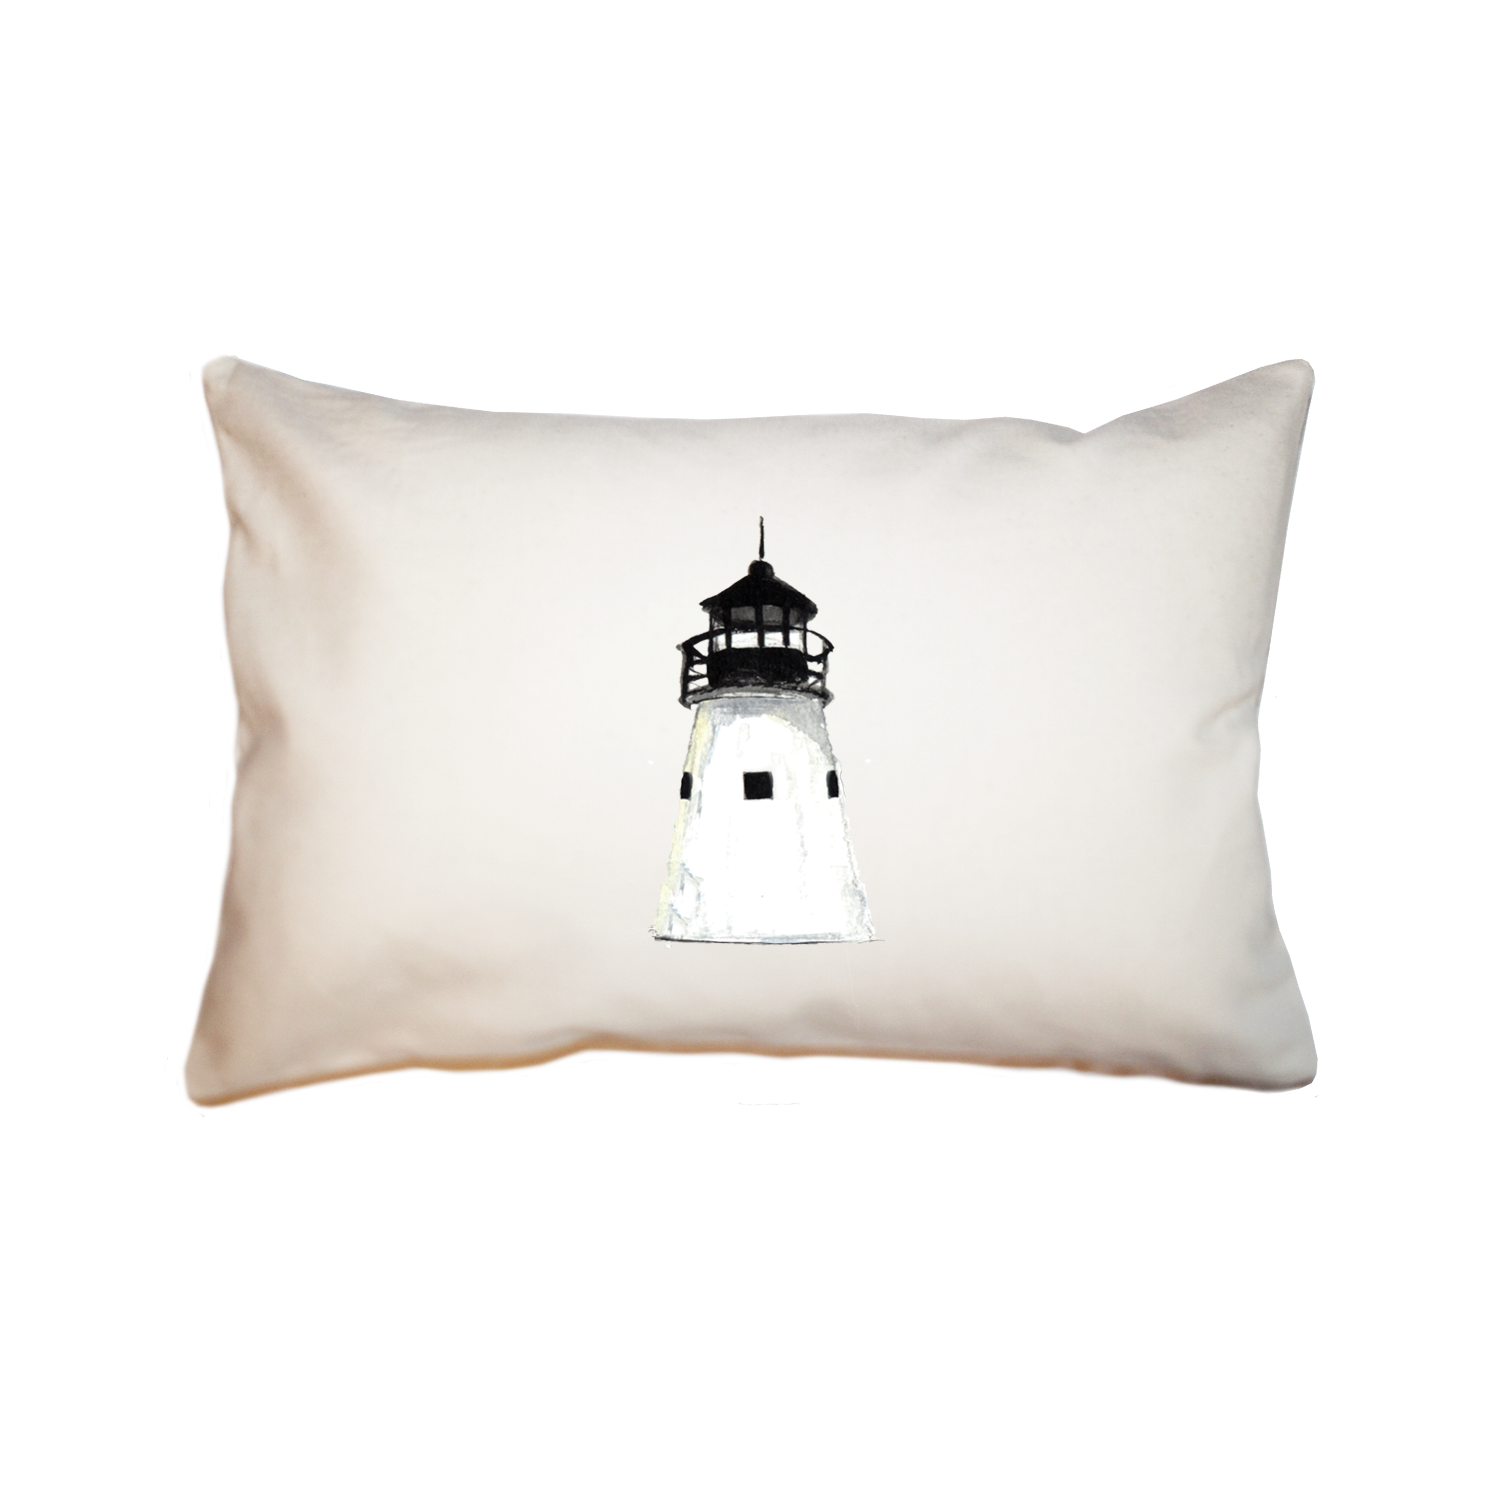 lobster point lighthouse ogunqiut large rectangle pillow